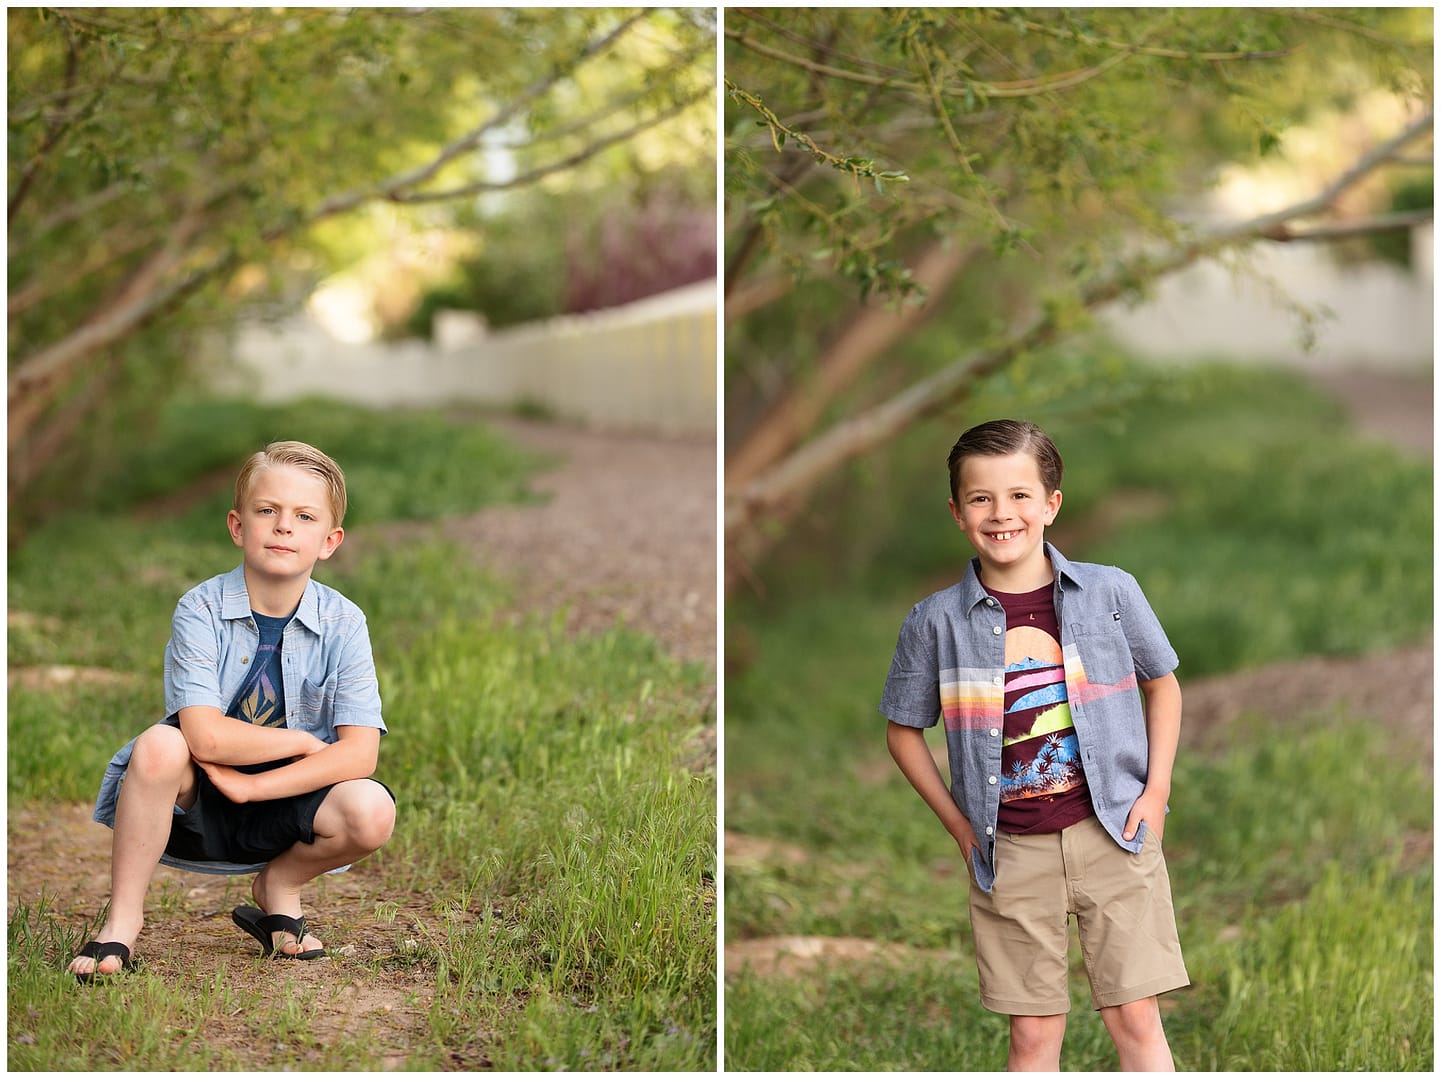 8 year old boys smile for camera. Photo by Tiffany Hix Photography.